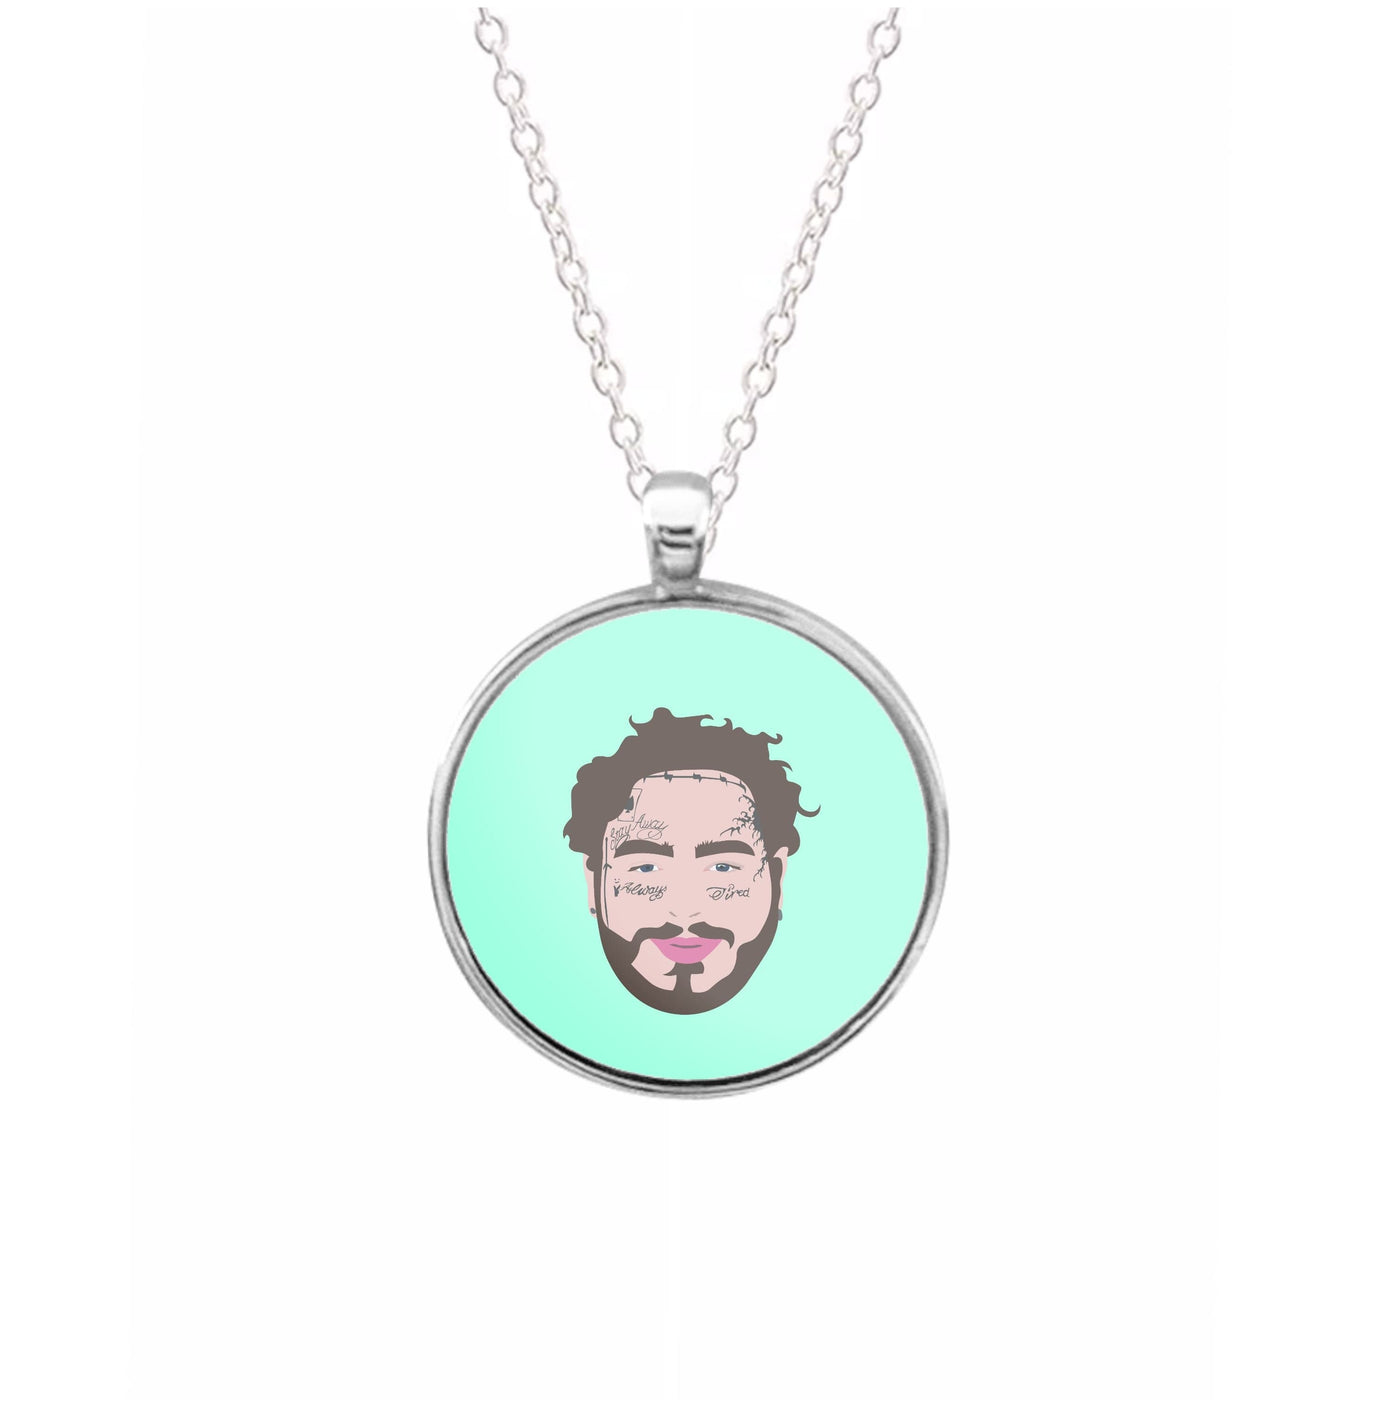 Face Tattoos - Post Malone Necklace